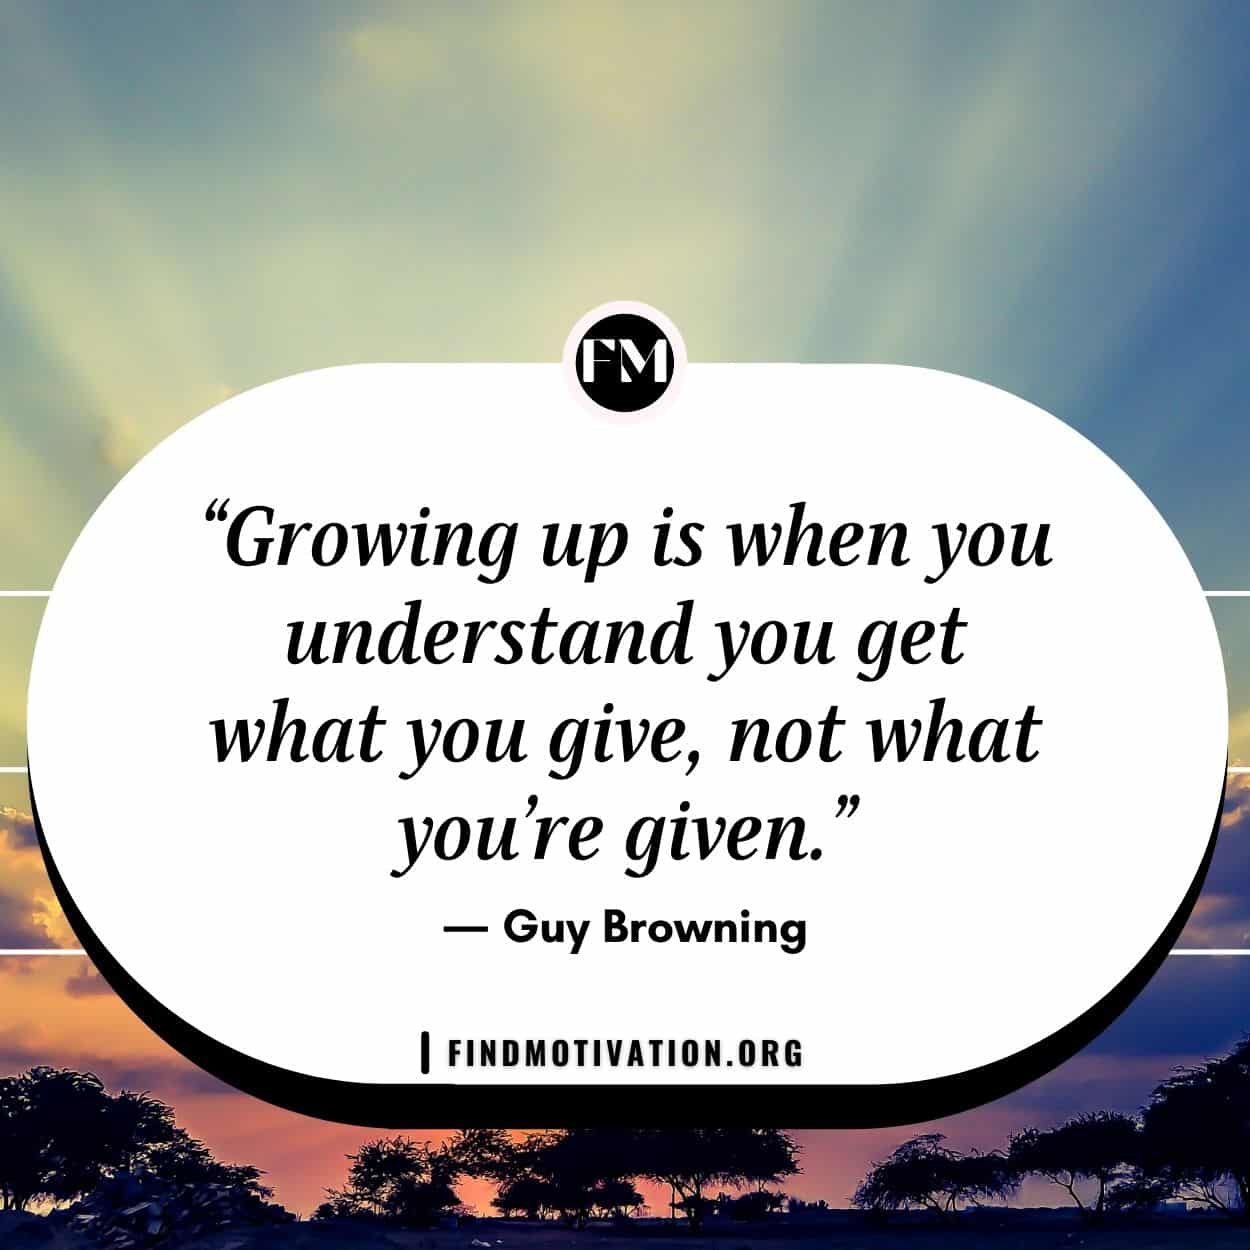 Motivational growing up quotes to expand your thinking in your life